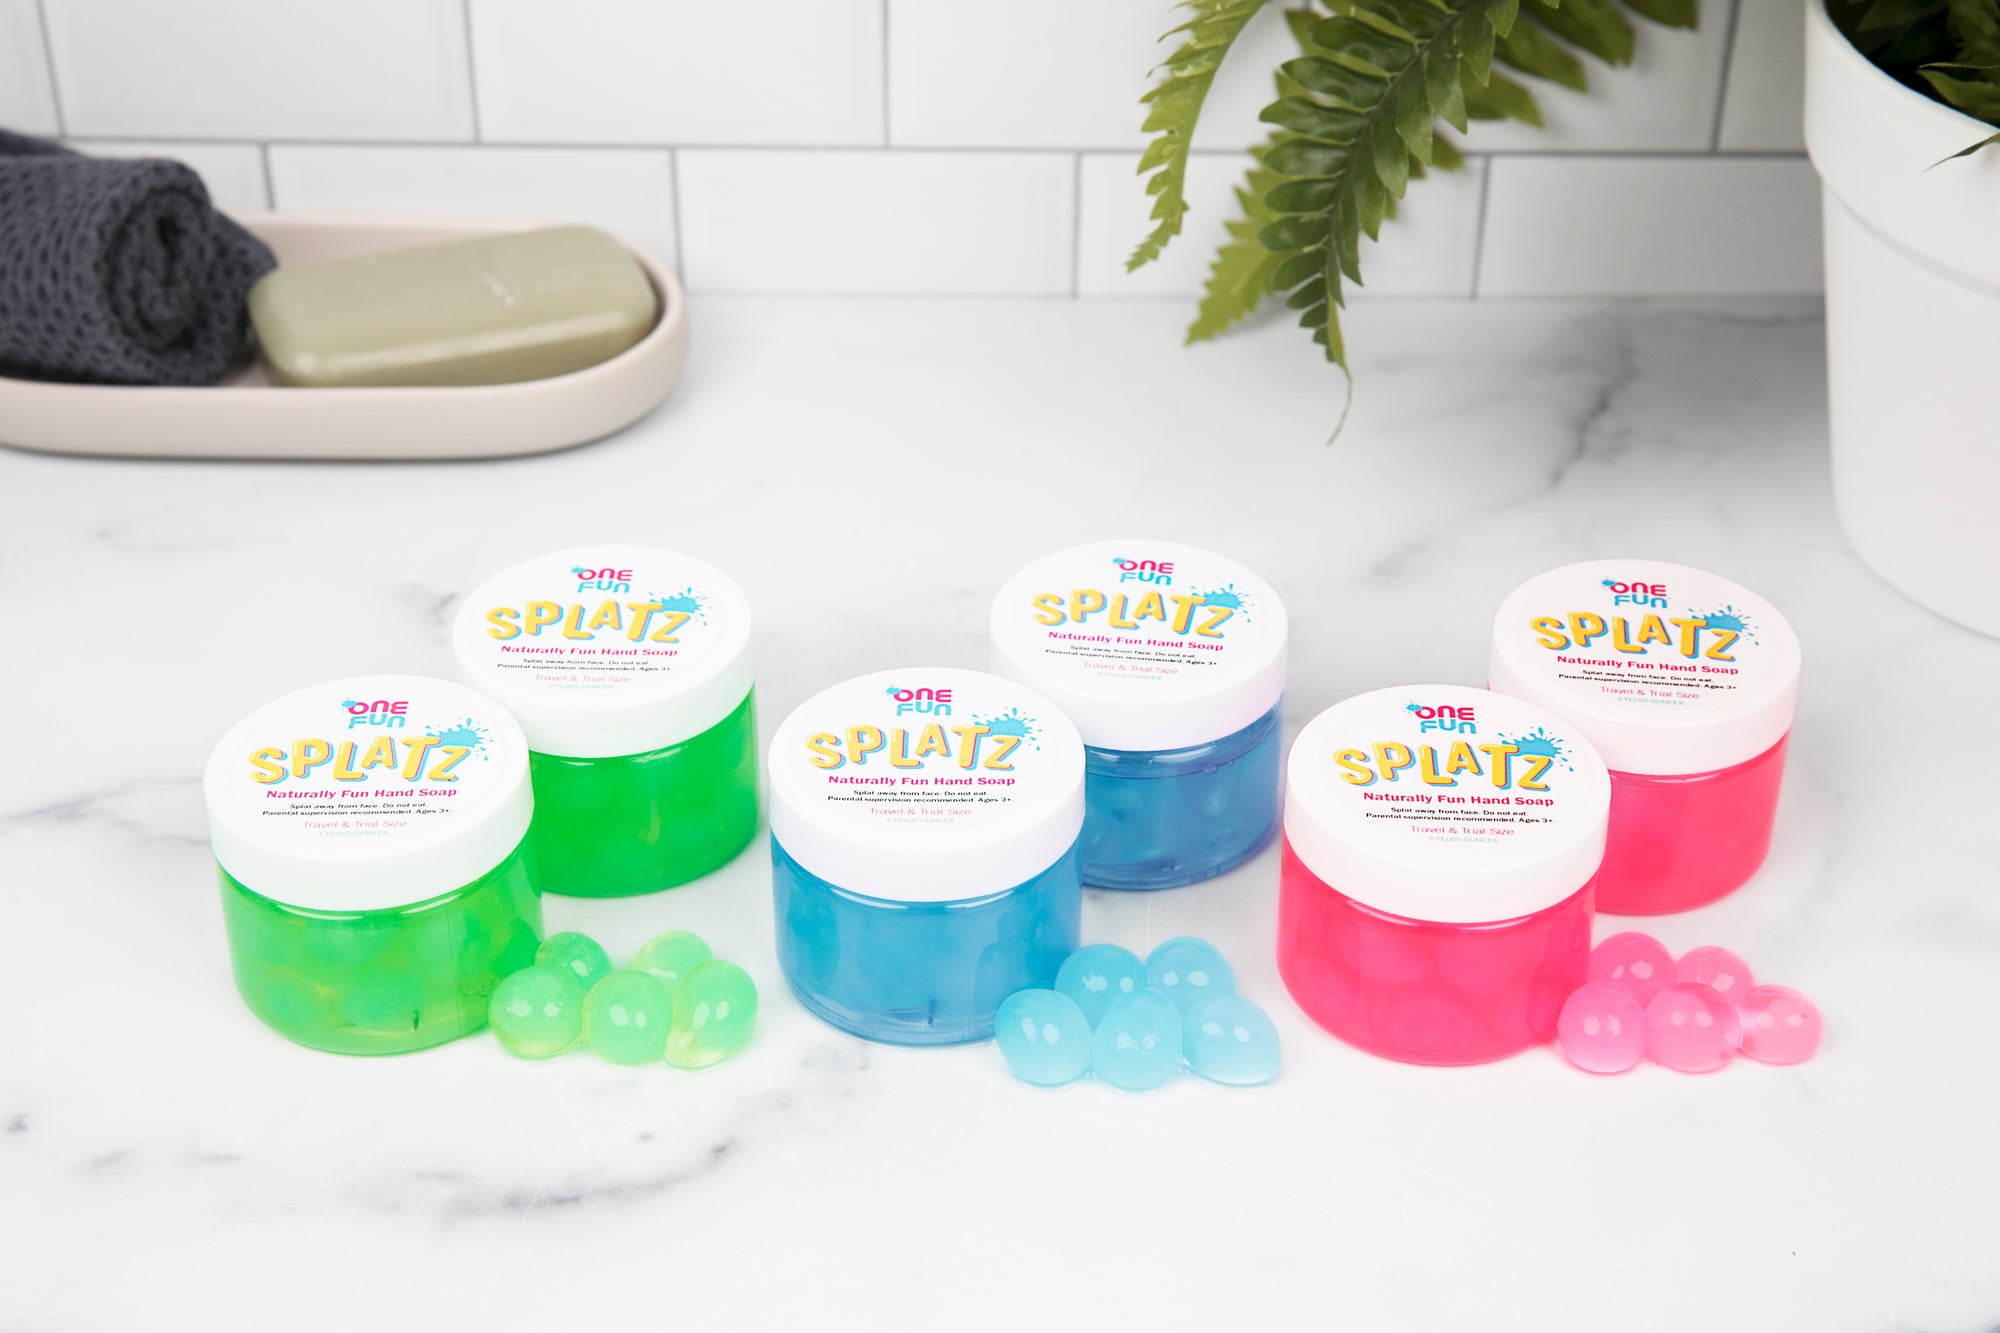 On a bathroom counter. Two 3oz jars of green bursting soap bubbles, two 3oz jars of turquoise bursting soap bubbles, and two 3oz jars of pink bursting soap bubbles